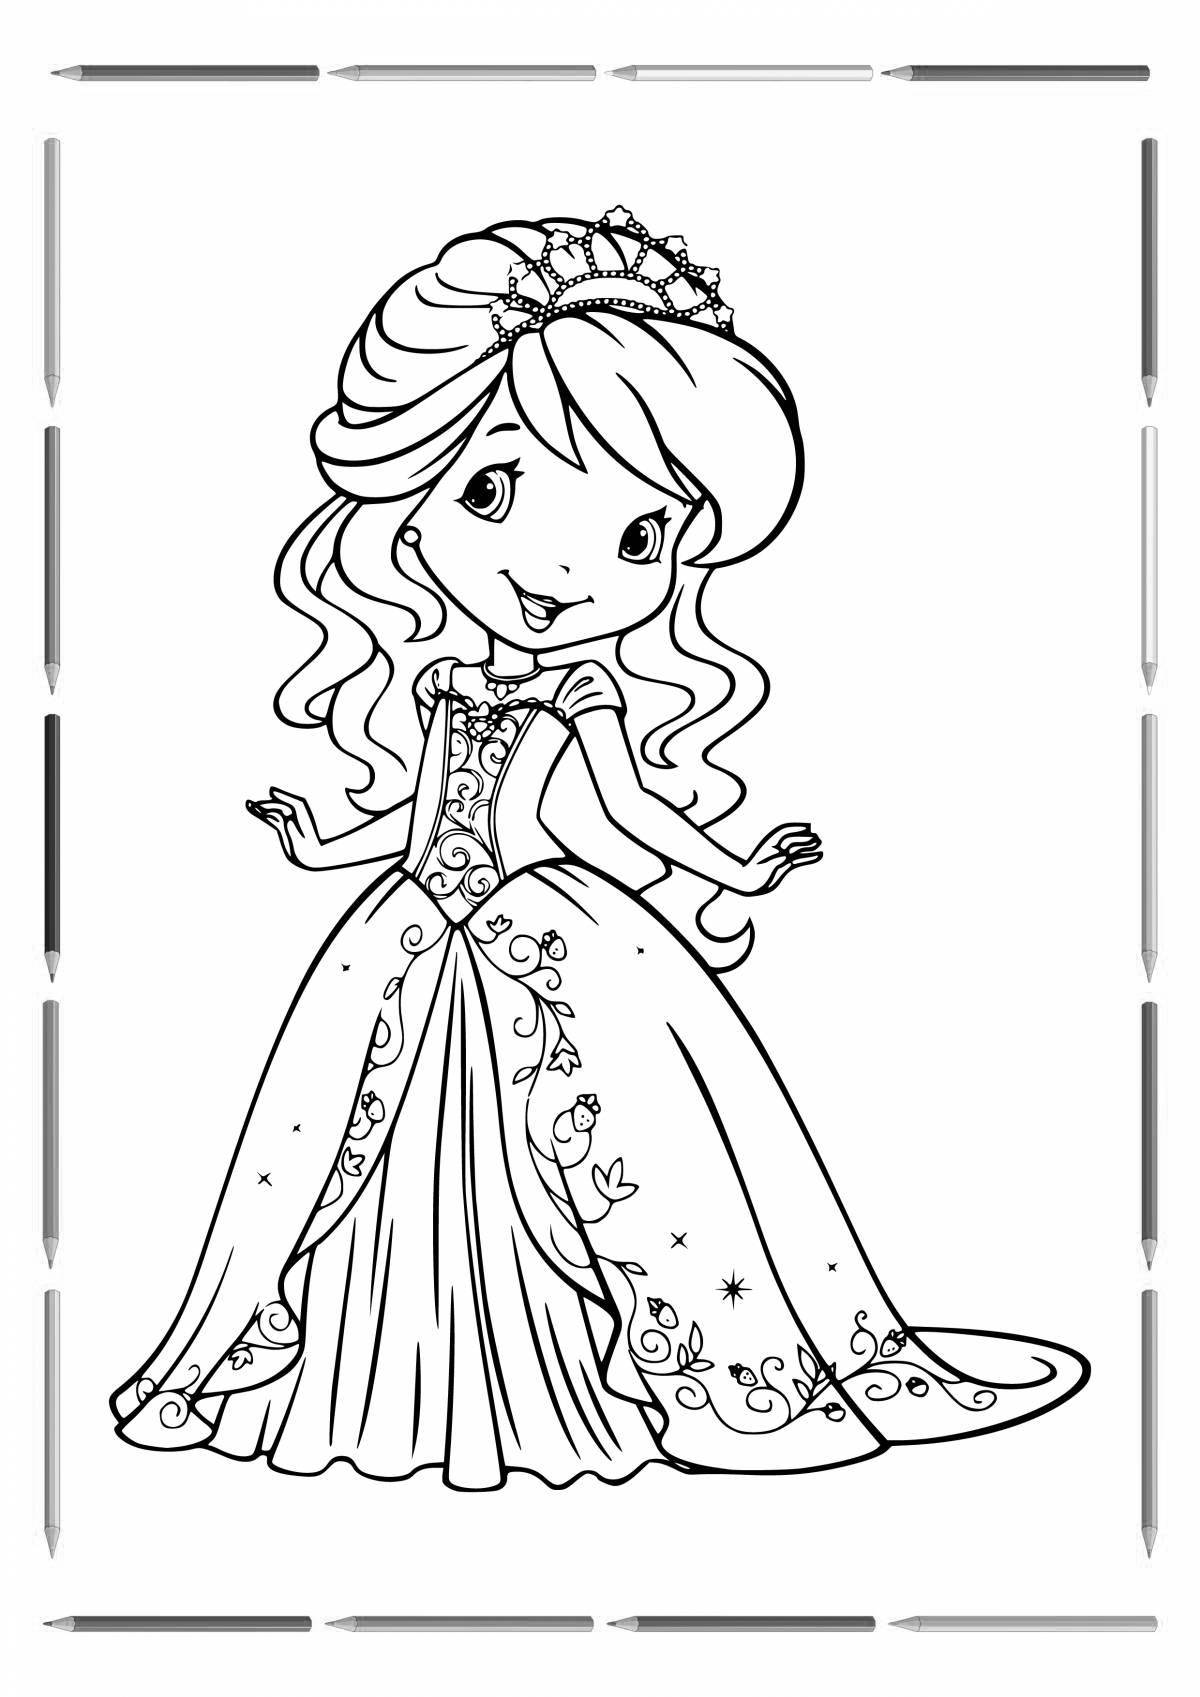 Luminous princess coloring pages for girls 4 years old